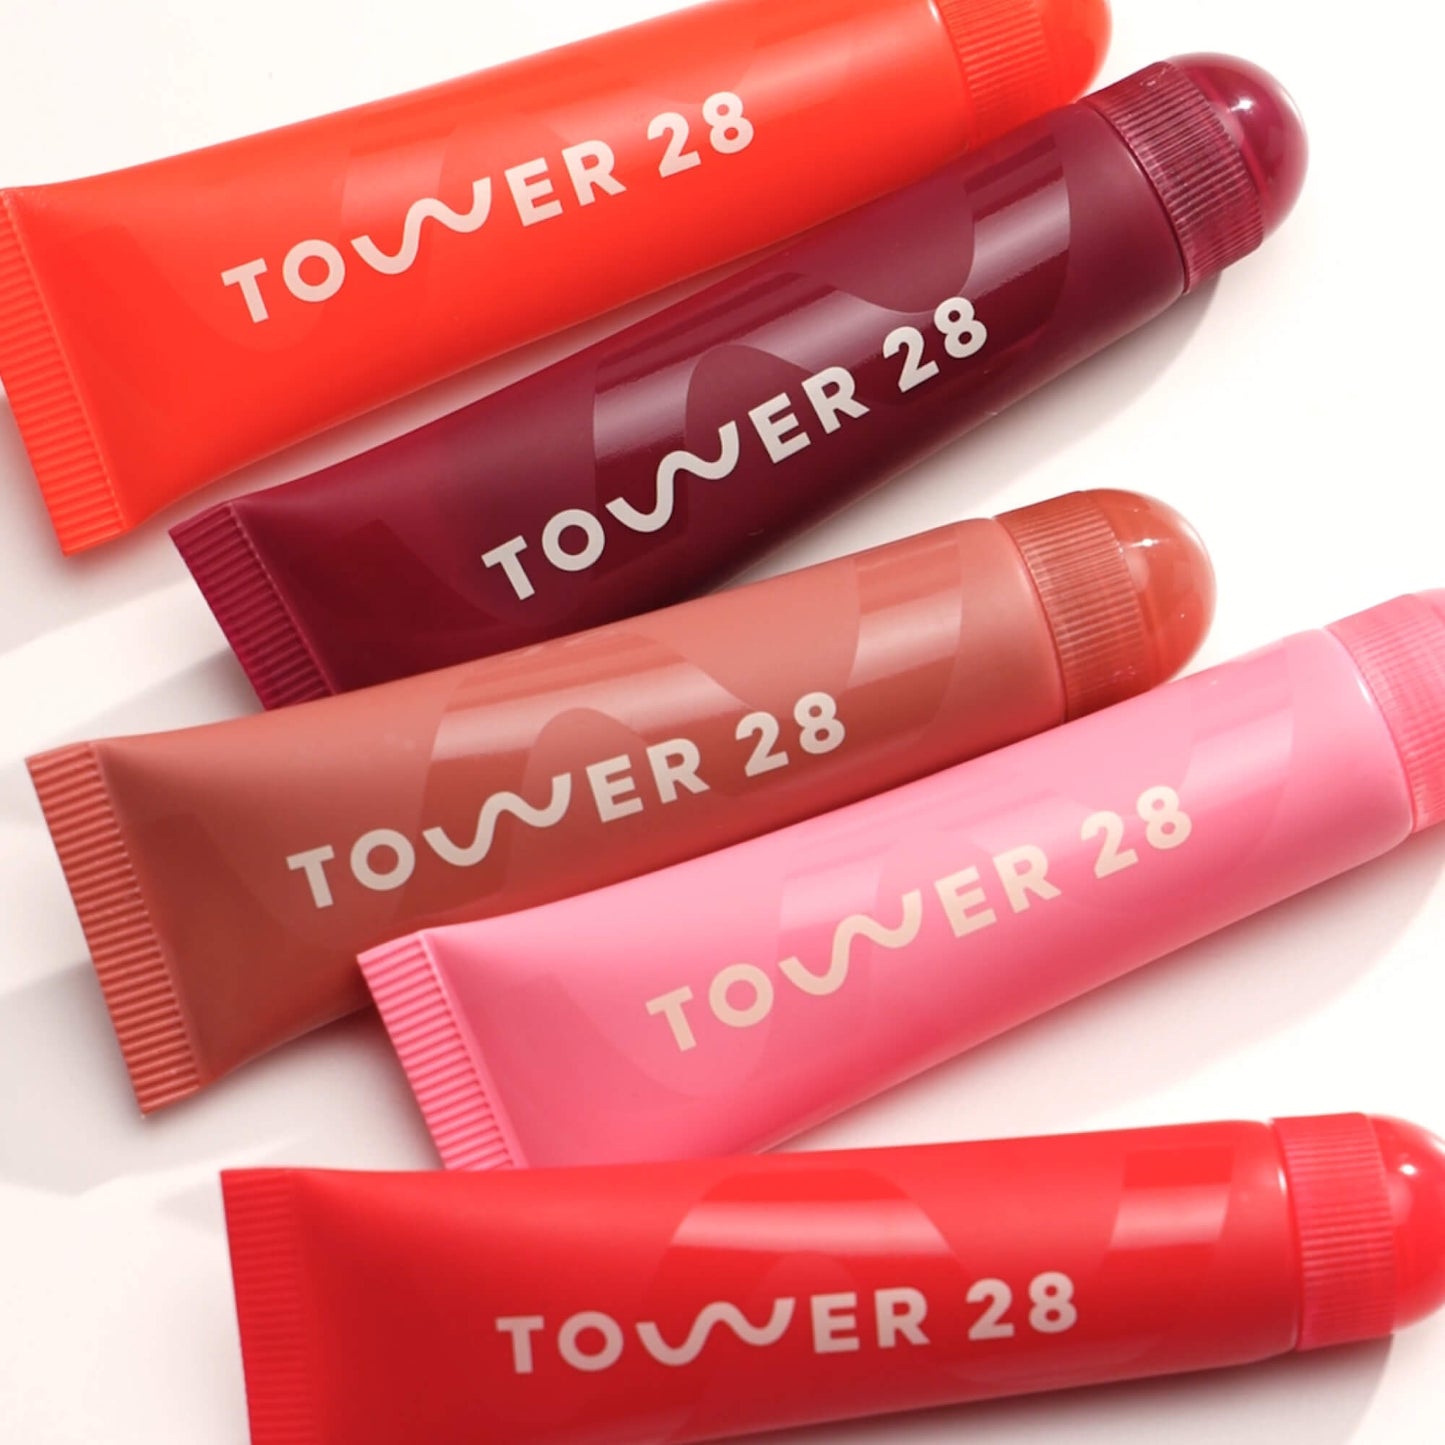 [Family group photo of the Tower 28 Beauty LipSoftie™ Lip Treatment on white]